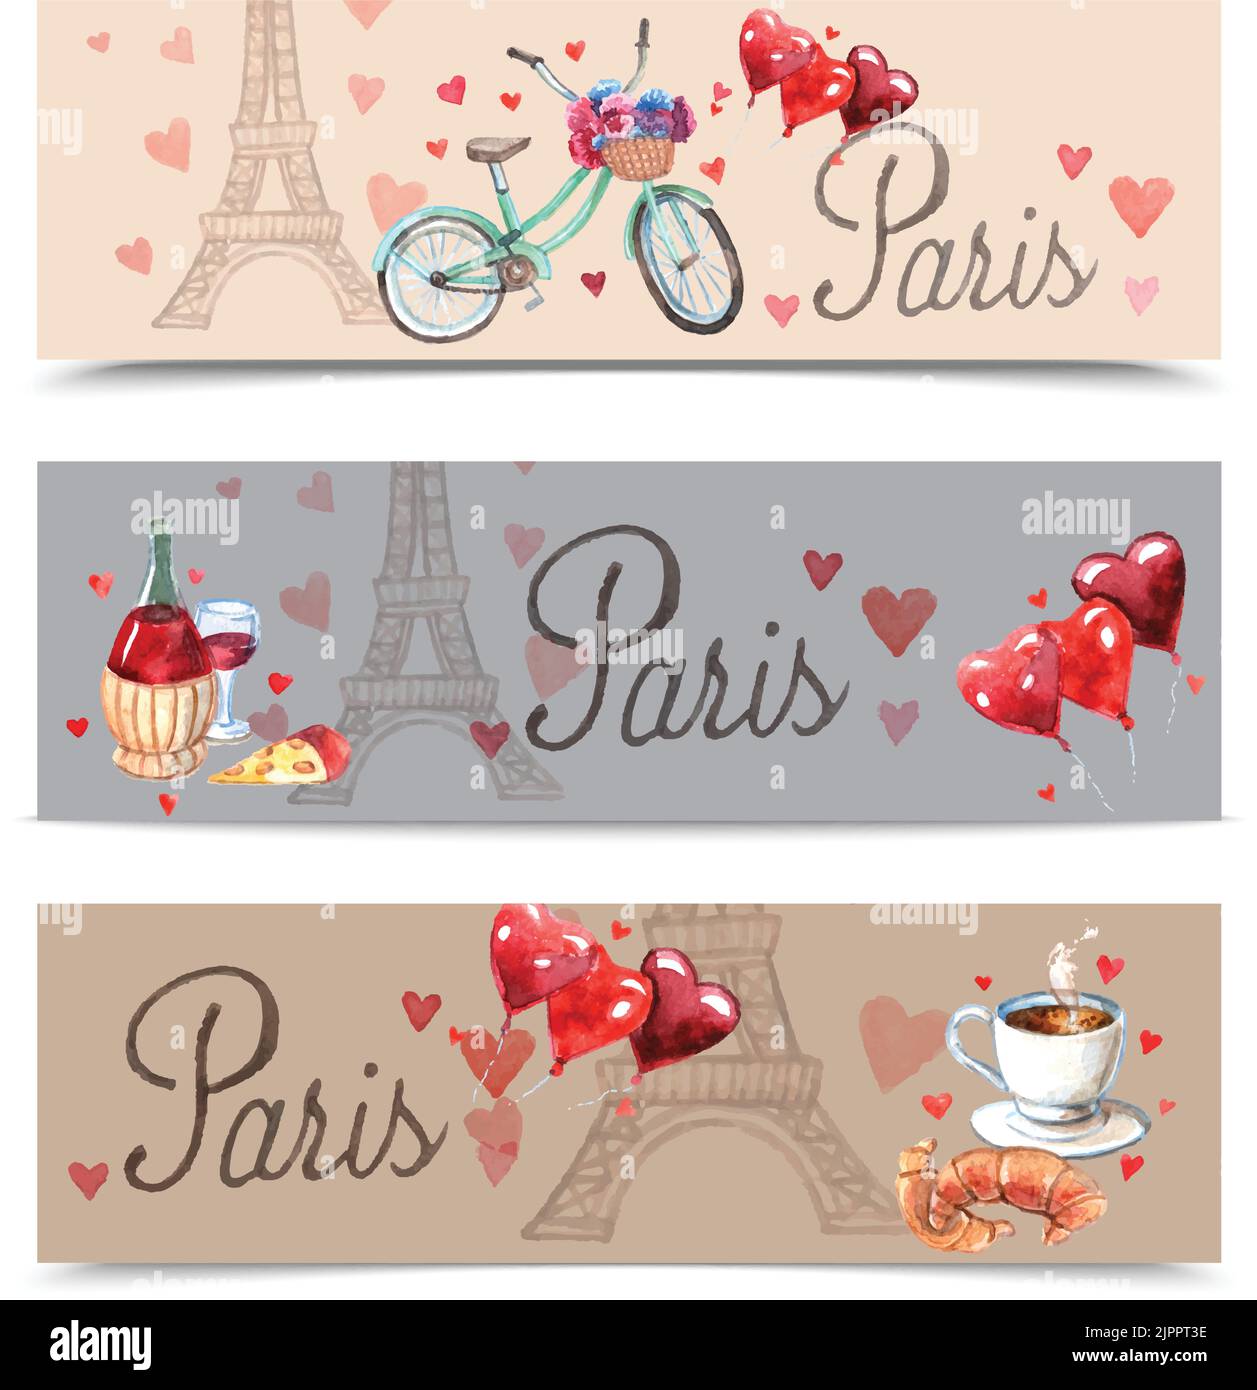 Paris  romantic love balloons and red wine with eiffel tower background banners set abstract watercolor vector illustration Stock Vector